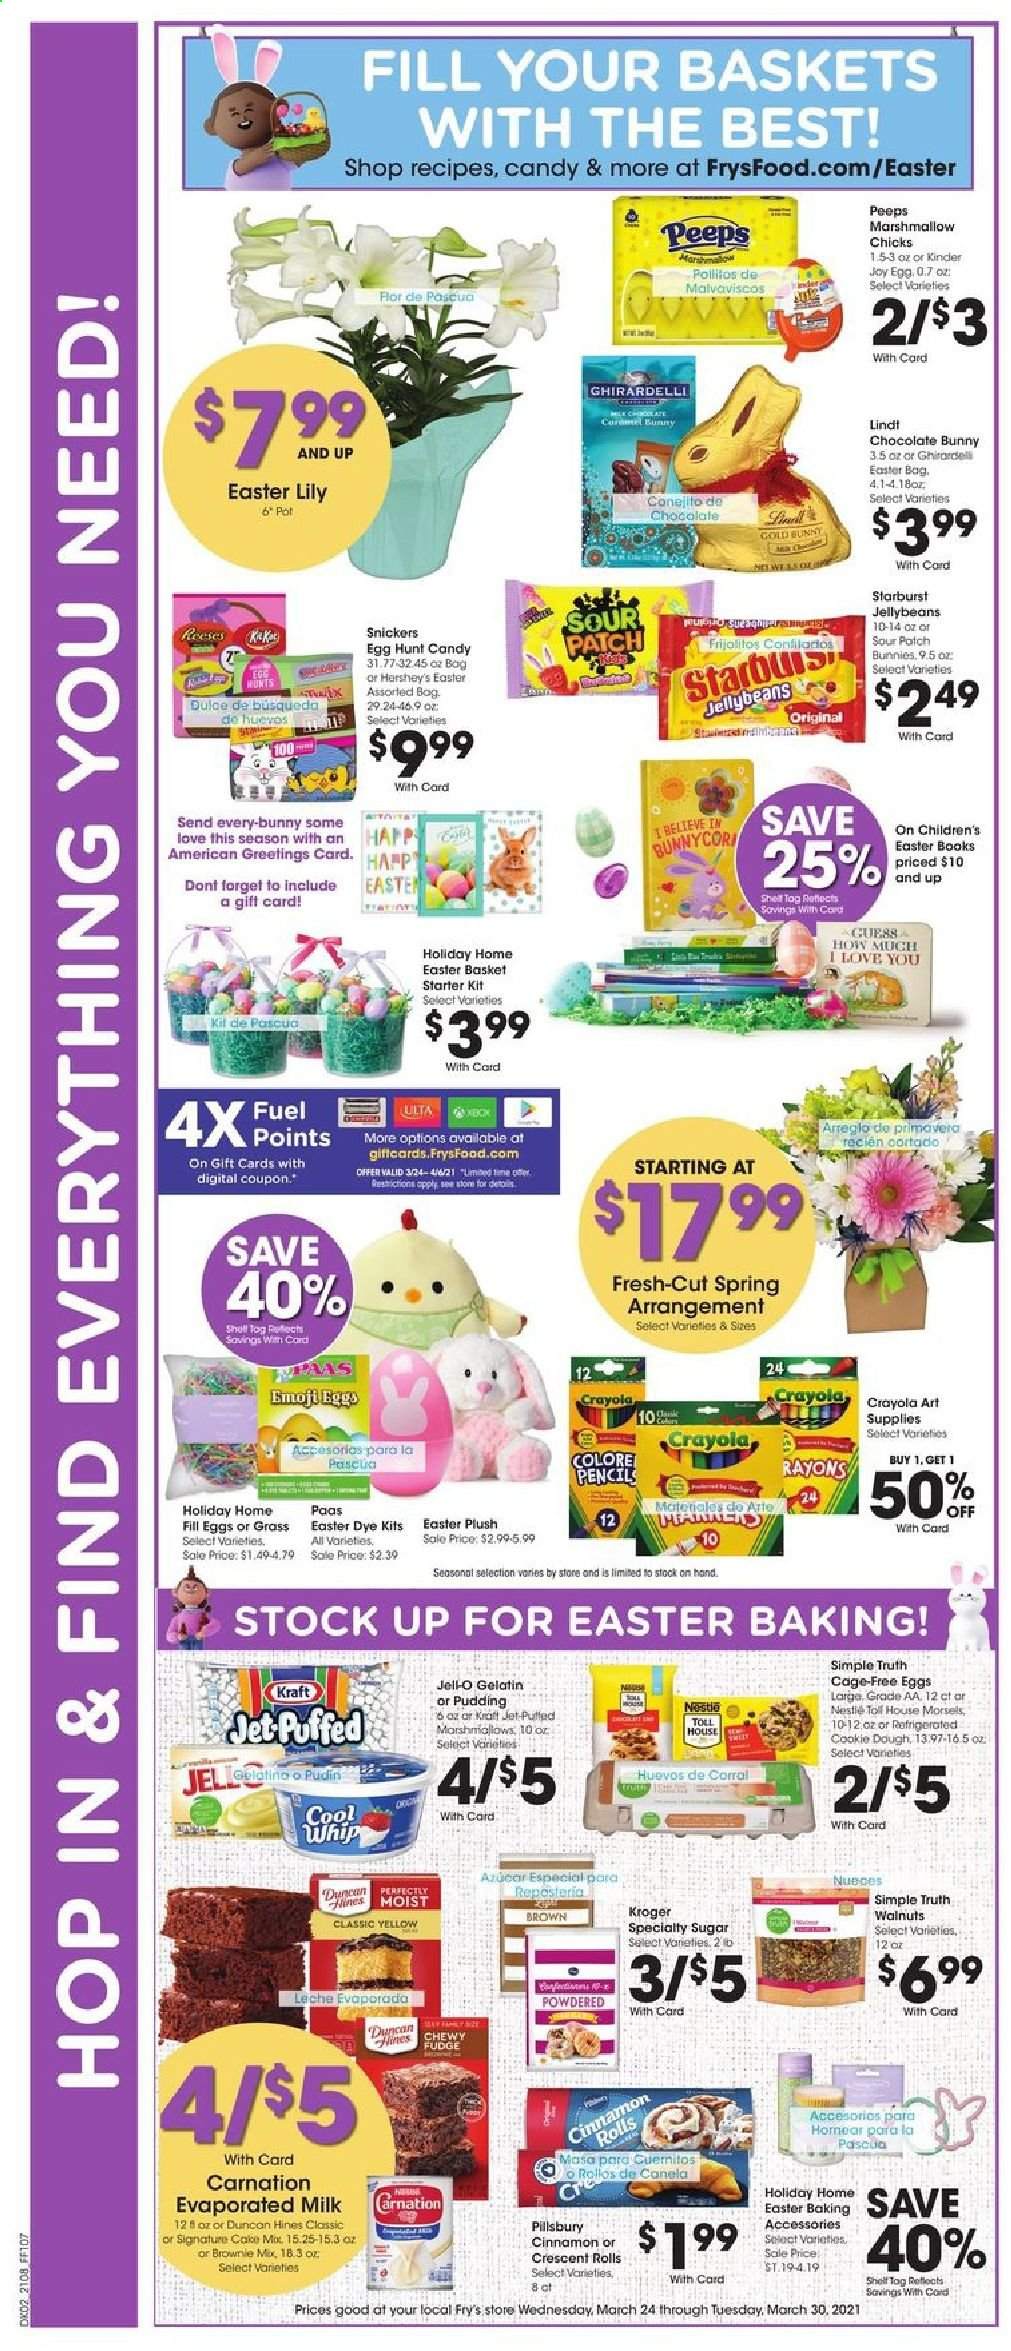 thumbnail - Fry’s Flyer - 03/24/2021 - 03/30/2021 - Sales products - brownie mix, crescent rolls, cake, Kraft®, pudding, evaporated milk, eggs, Cool Whip, Reese's, Hershey's, cookie dough, fudge, marshmallows, chocolate, Lindt, Snickers, chocolate bunny, Ghirardelli, Starburst, Sour Patch, Peeps, sugar, cinnamon, caramel, walnuts, Jet, Guess, basket, crayons, pencil, book, cage, gelatin. Page 4.